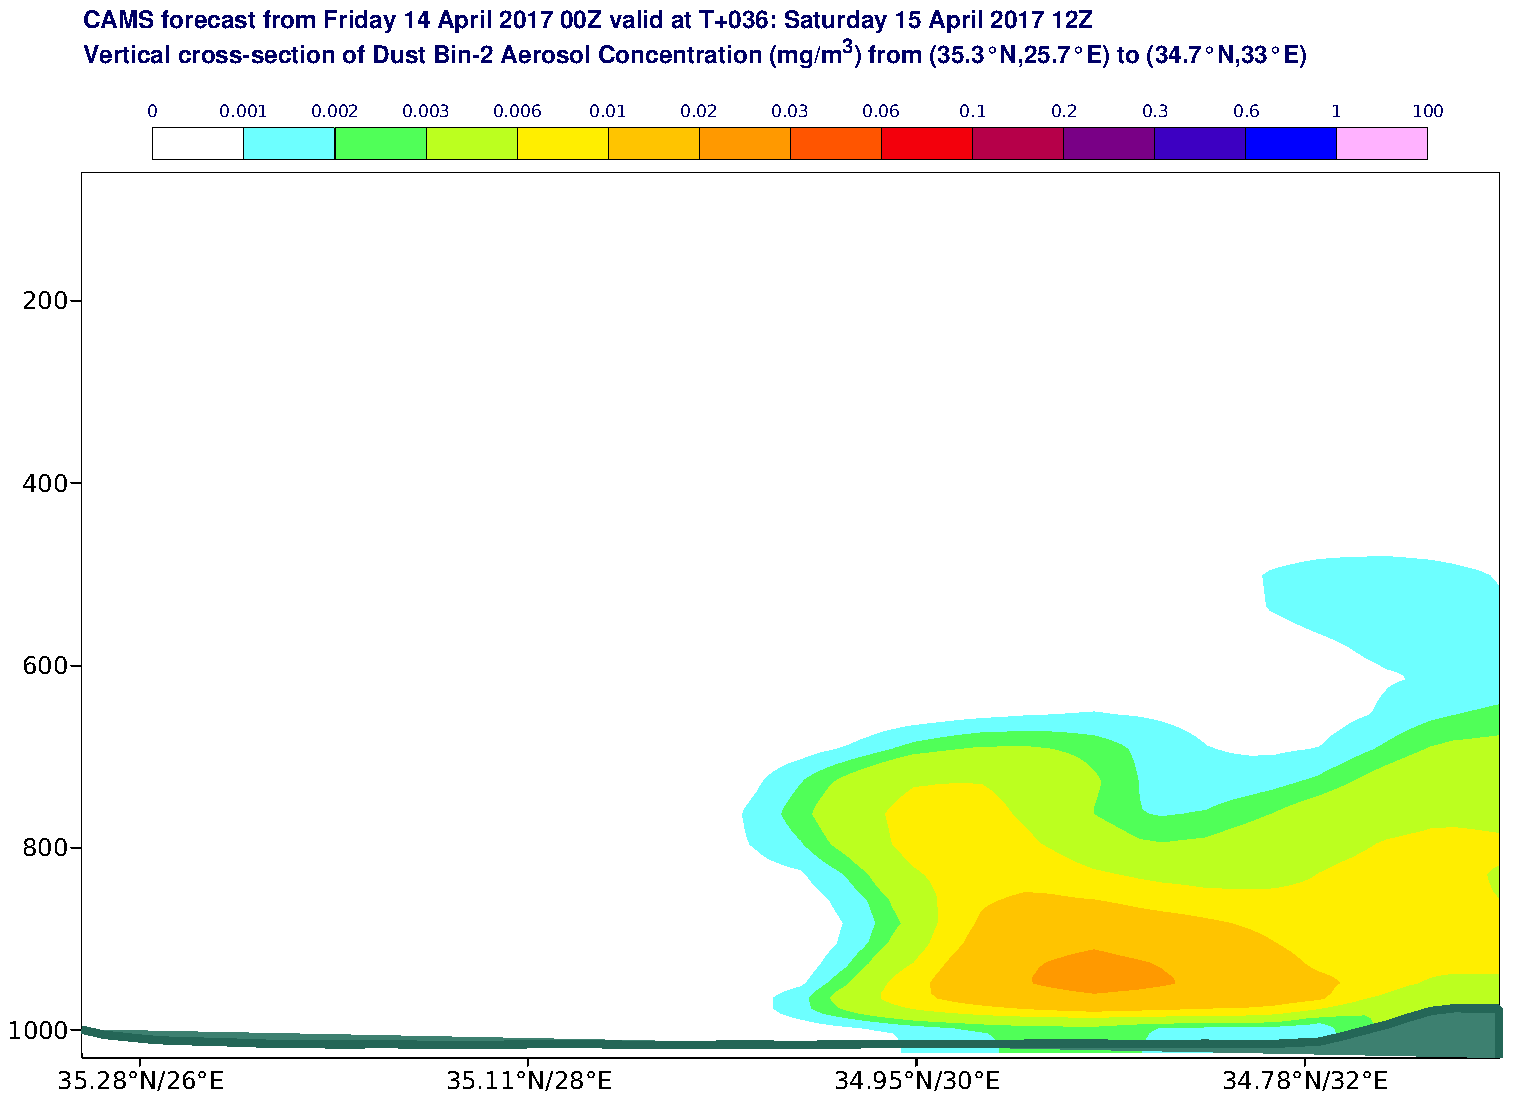 Vertical cross-section of Dust Bin-2 Aerosol Concentration (mg/m3) valid at T36 - 2017-04-15 12:00